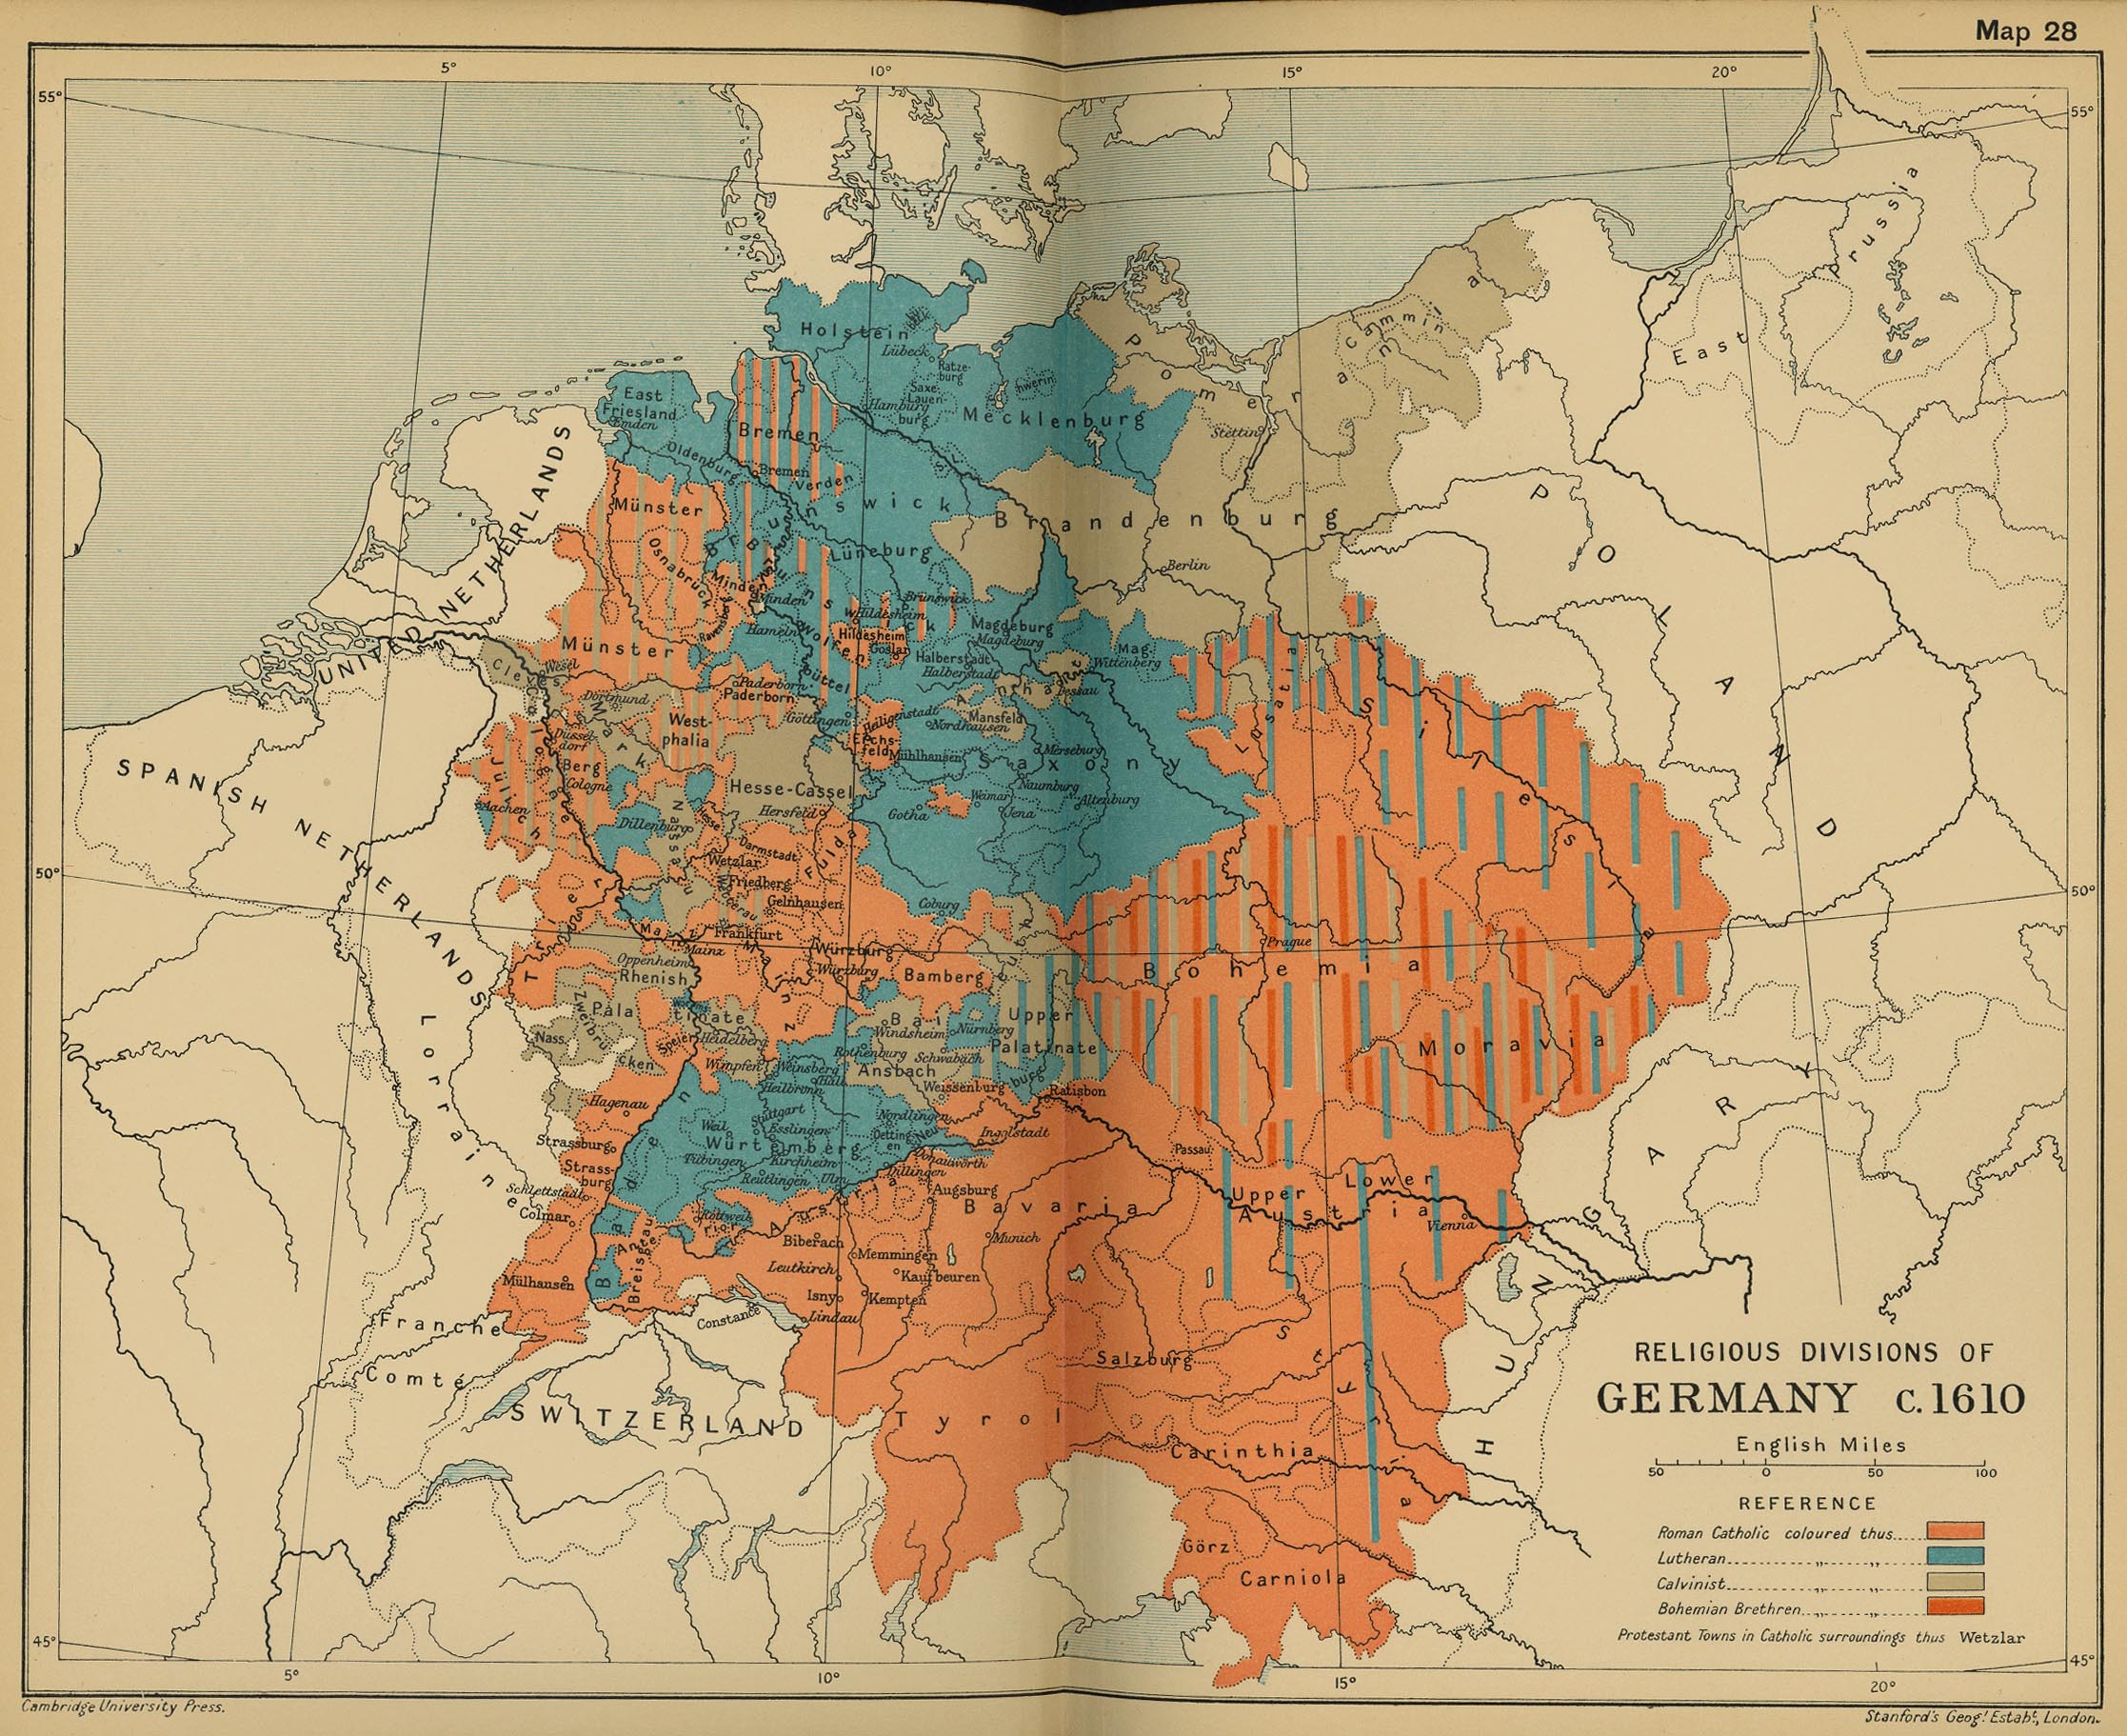 Map of the Religious Divisions of Germany, c. 1610